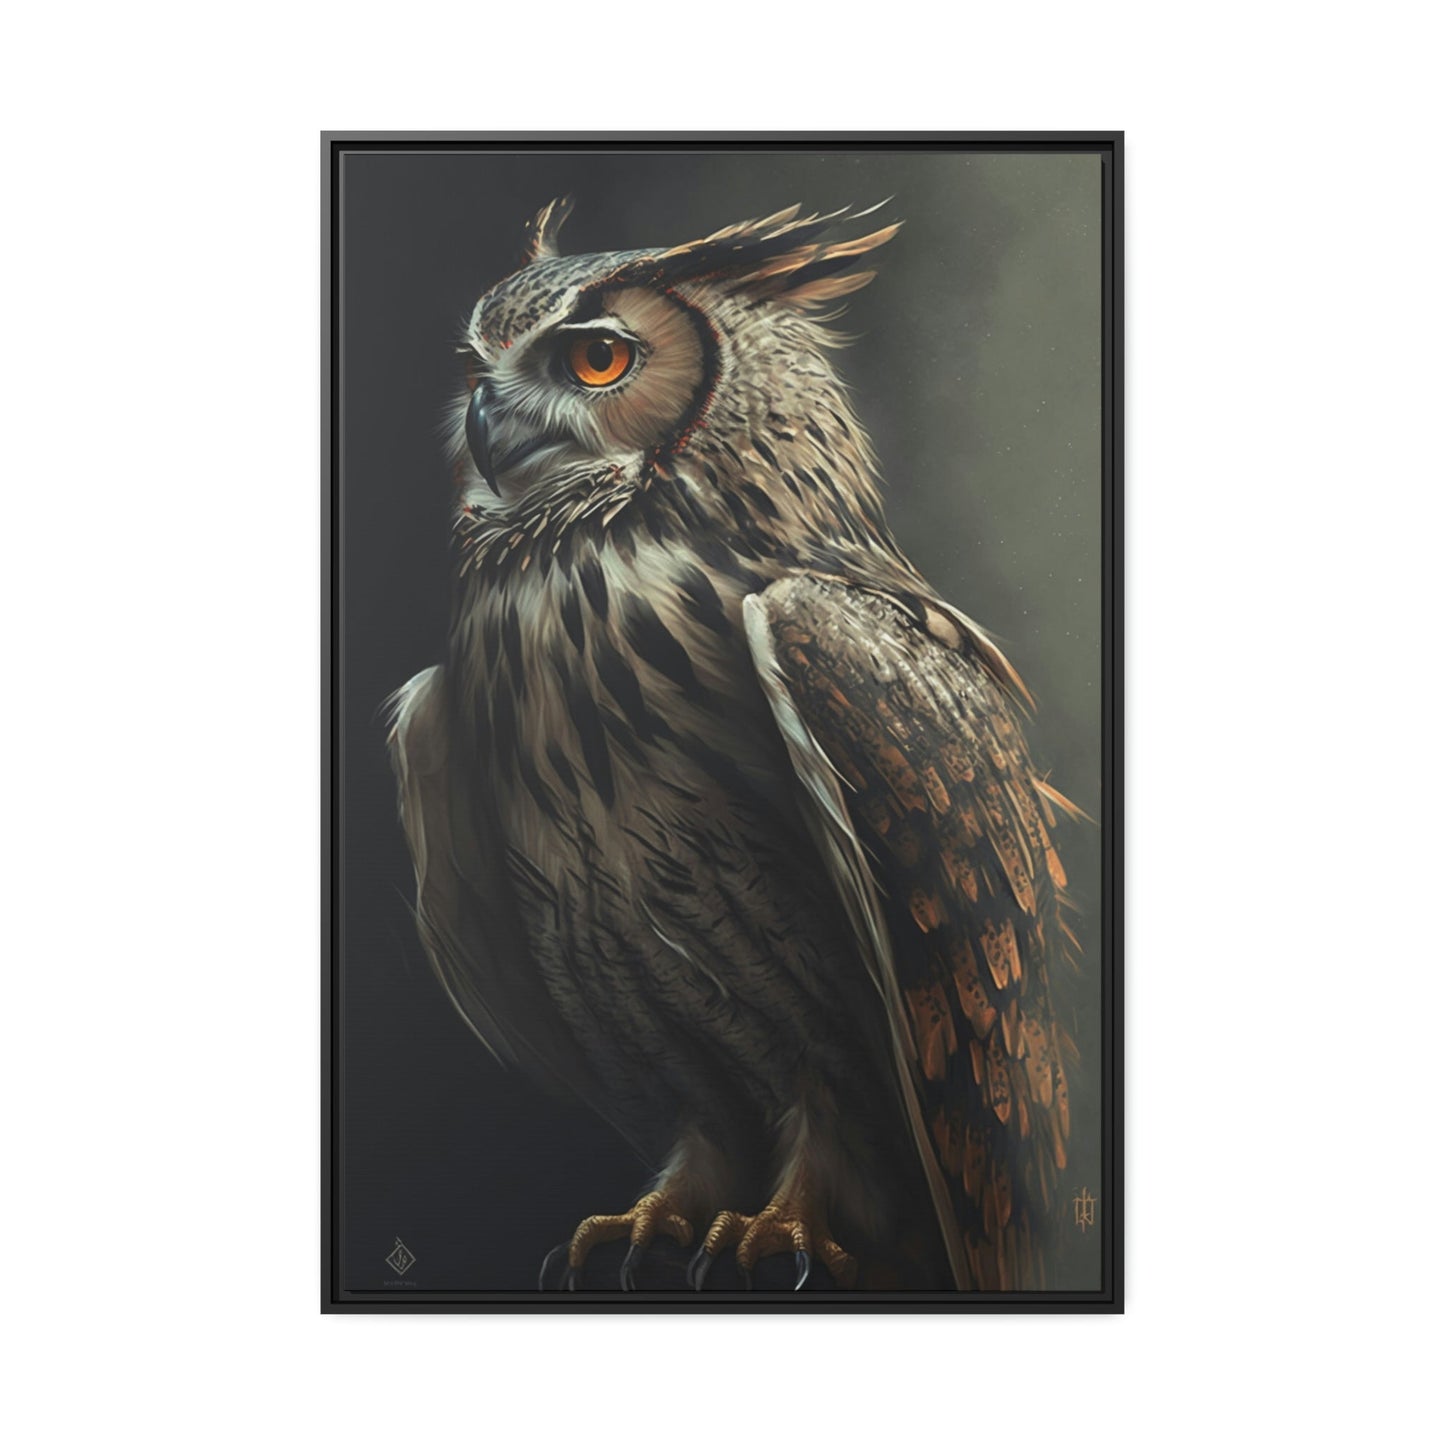 Noble Hunter: An Artistic Depiction of a Single Owl